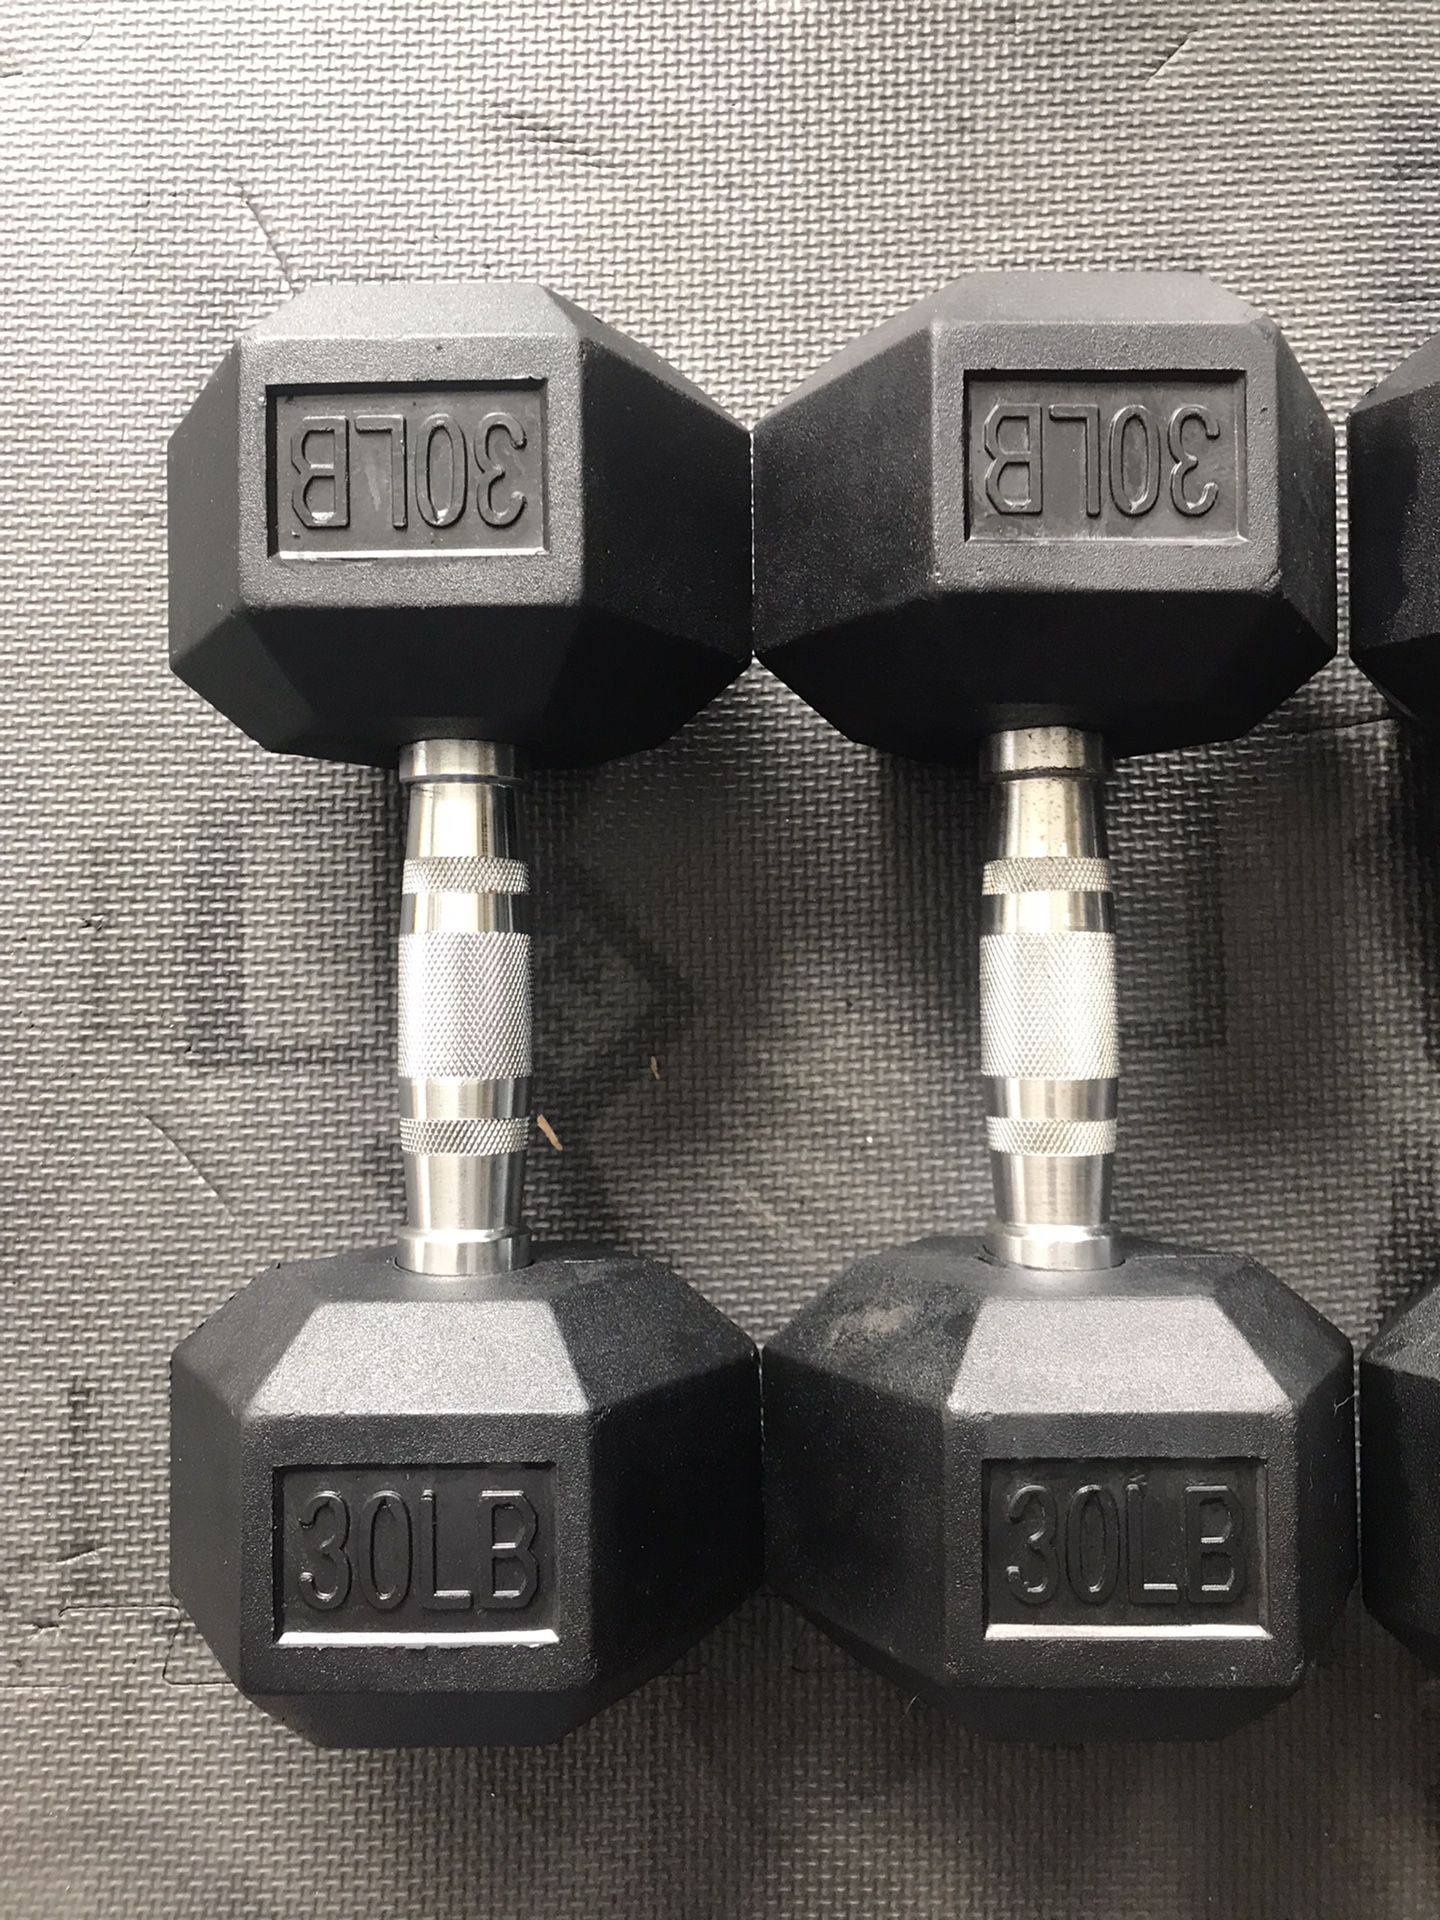 New Hex Dumbbells 💪 (2x30Lbs) for $48 Firm on Price 